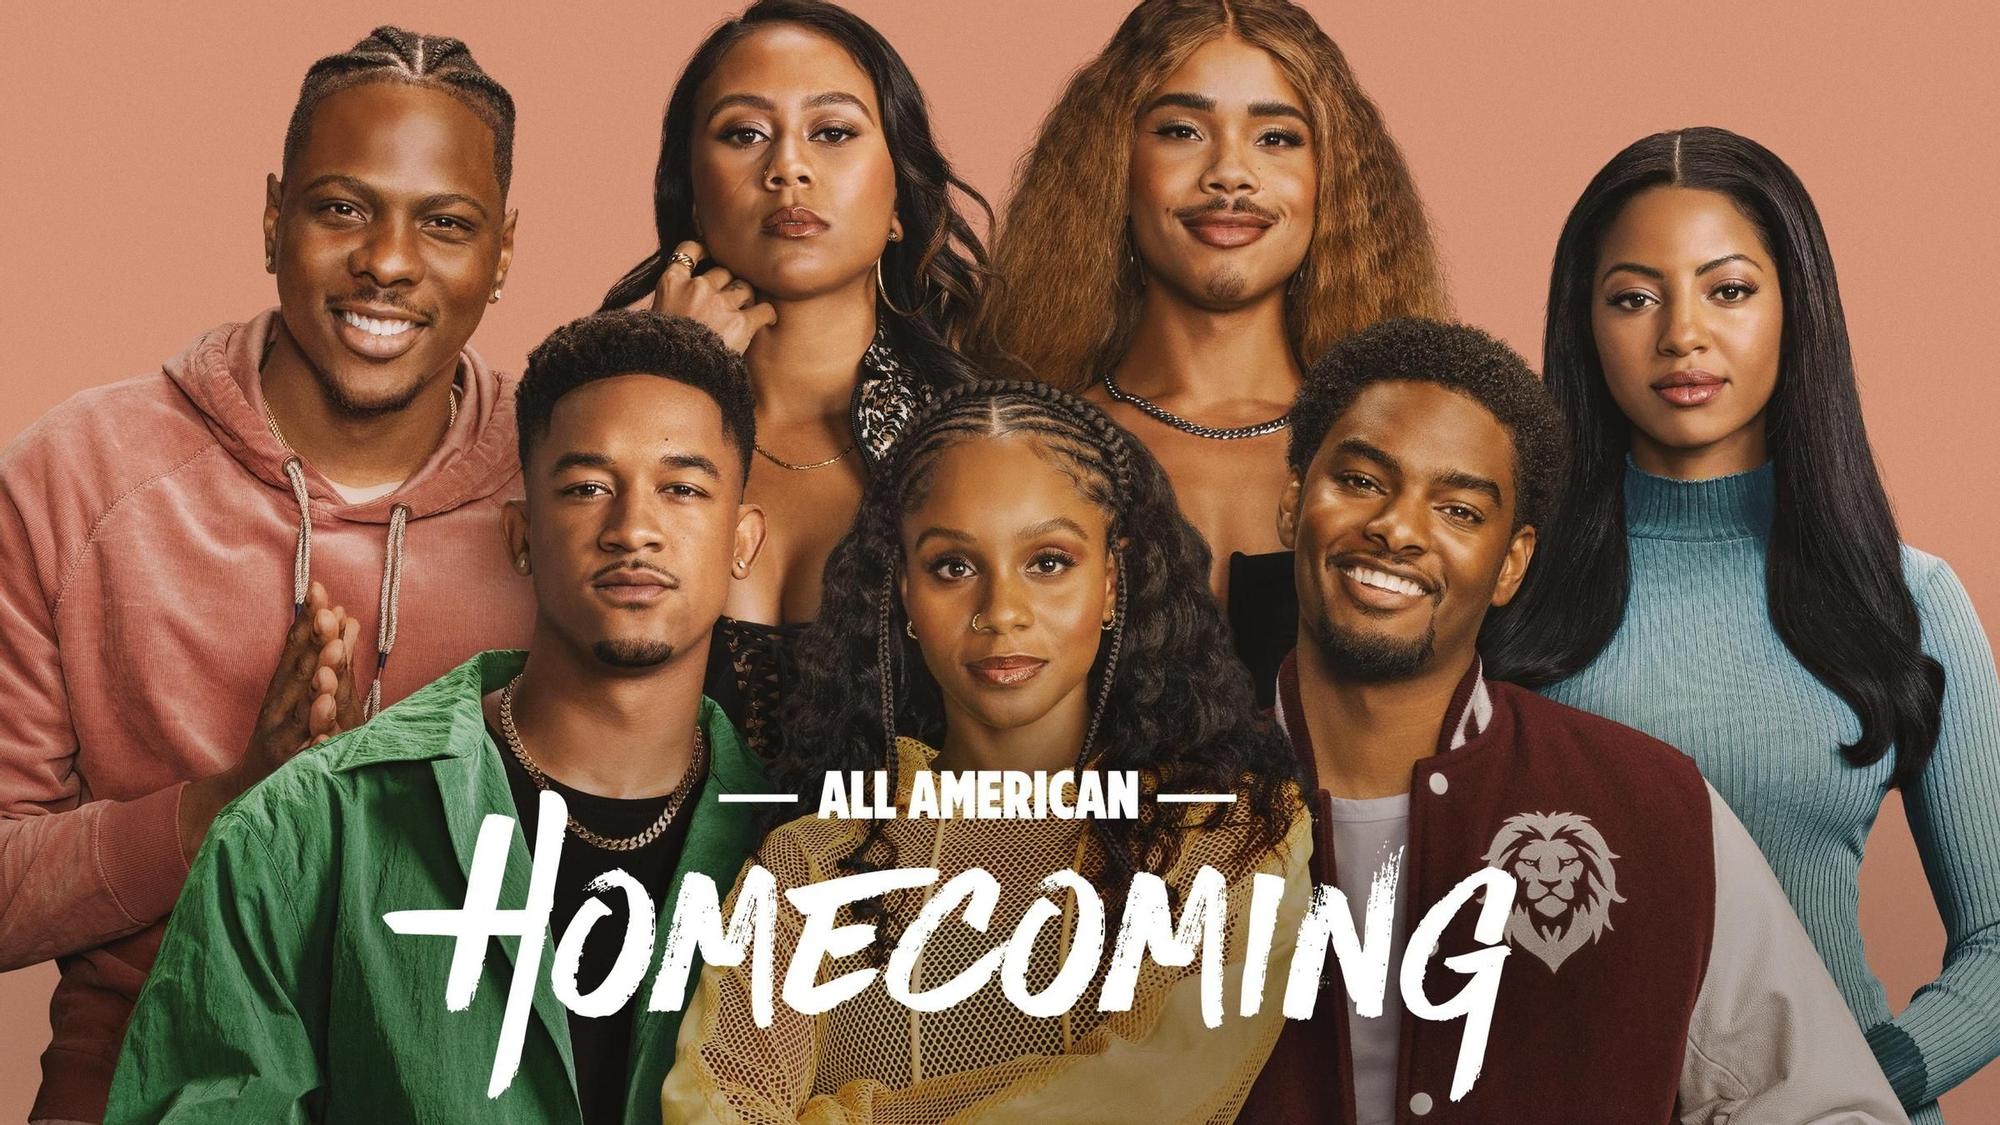 &#039;All american: Homecoming&#039;